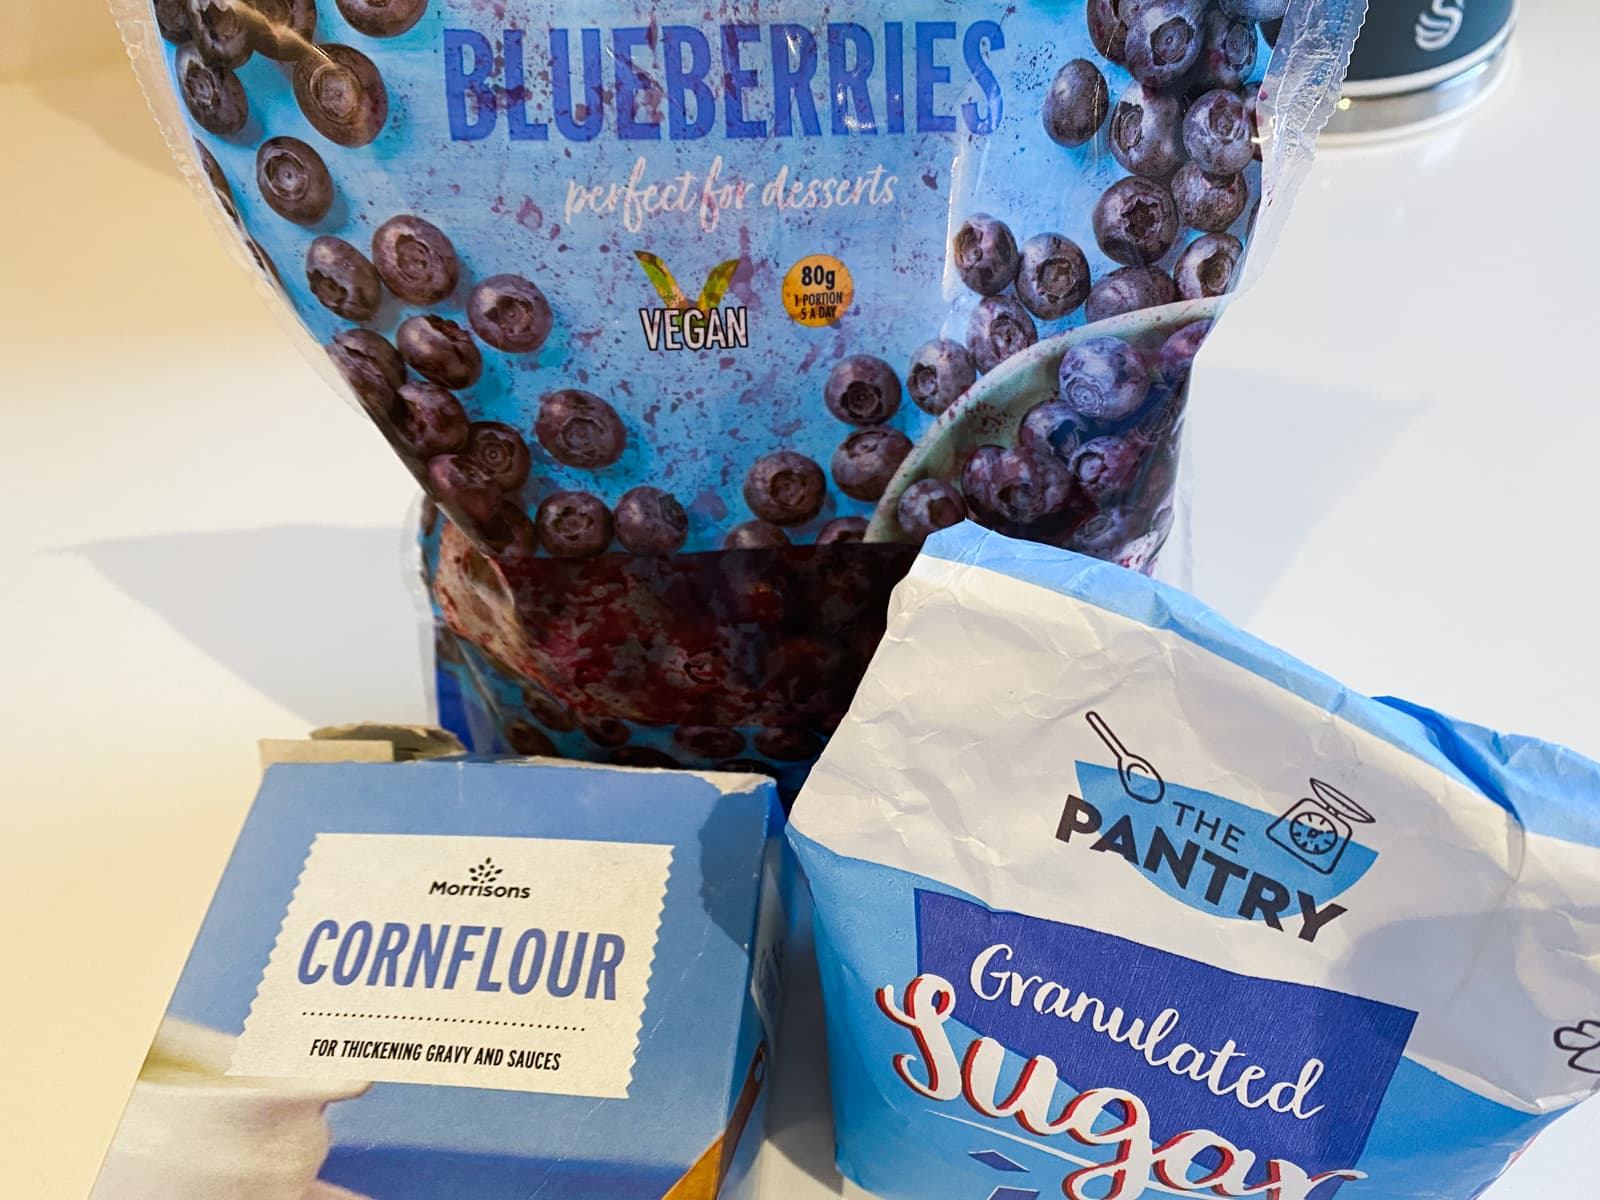 Ingredients to make a blueberry compote, frozen blueberries, sugar and cornflour.